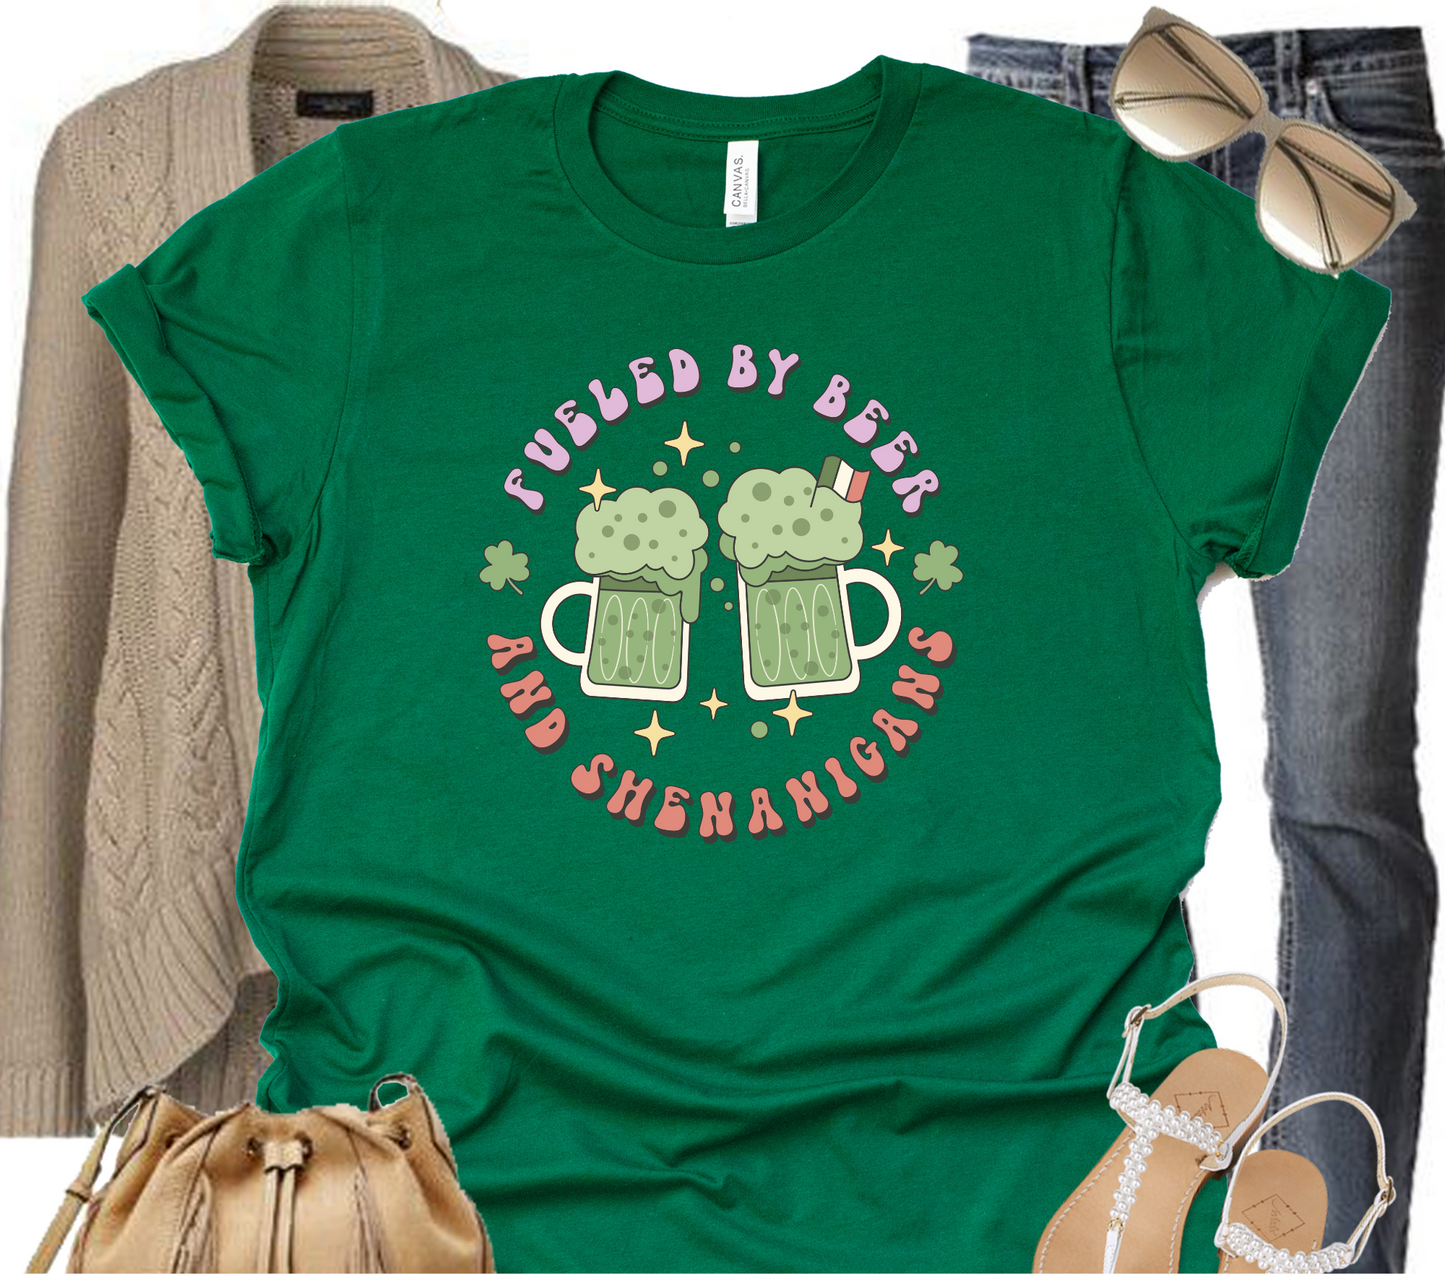 Fueled by Beer and Shenanigans Tee